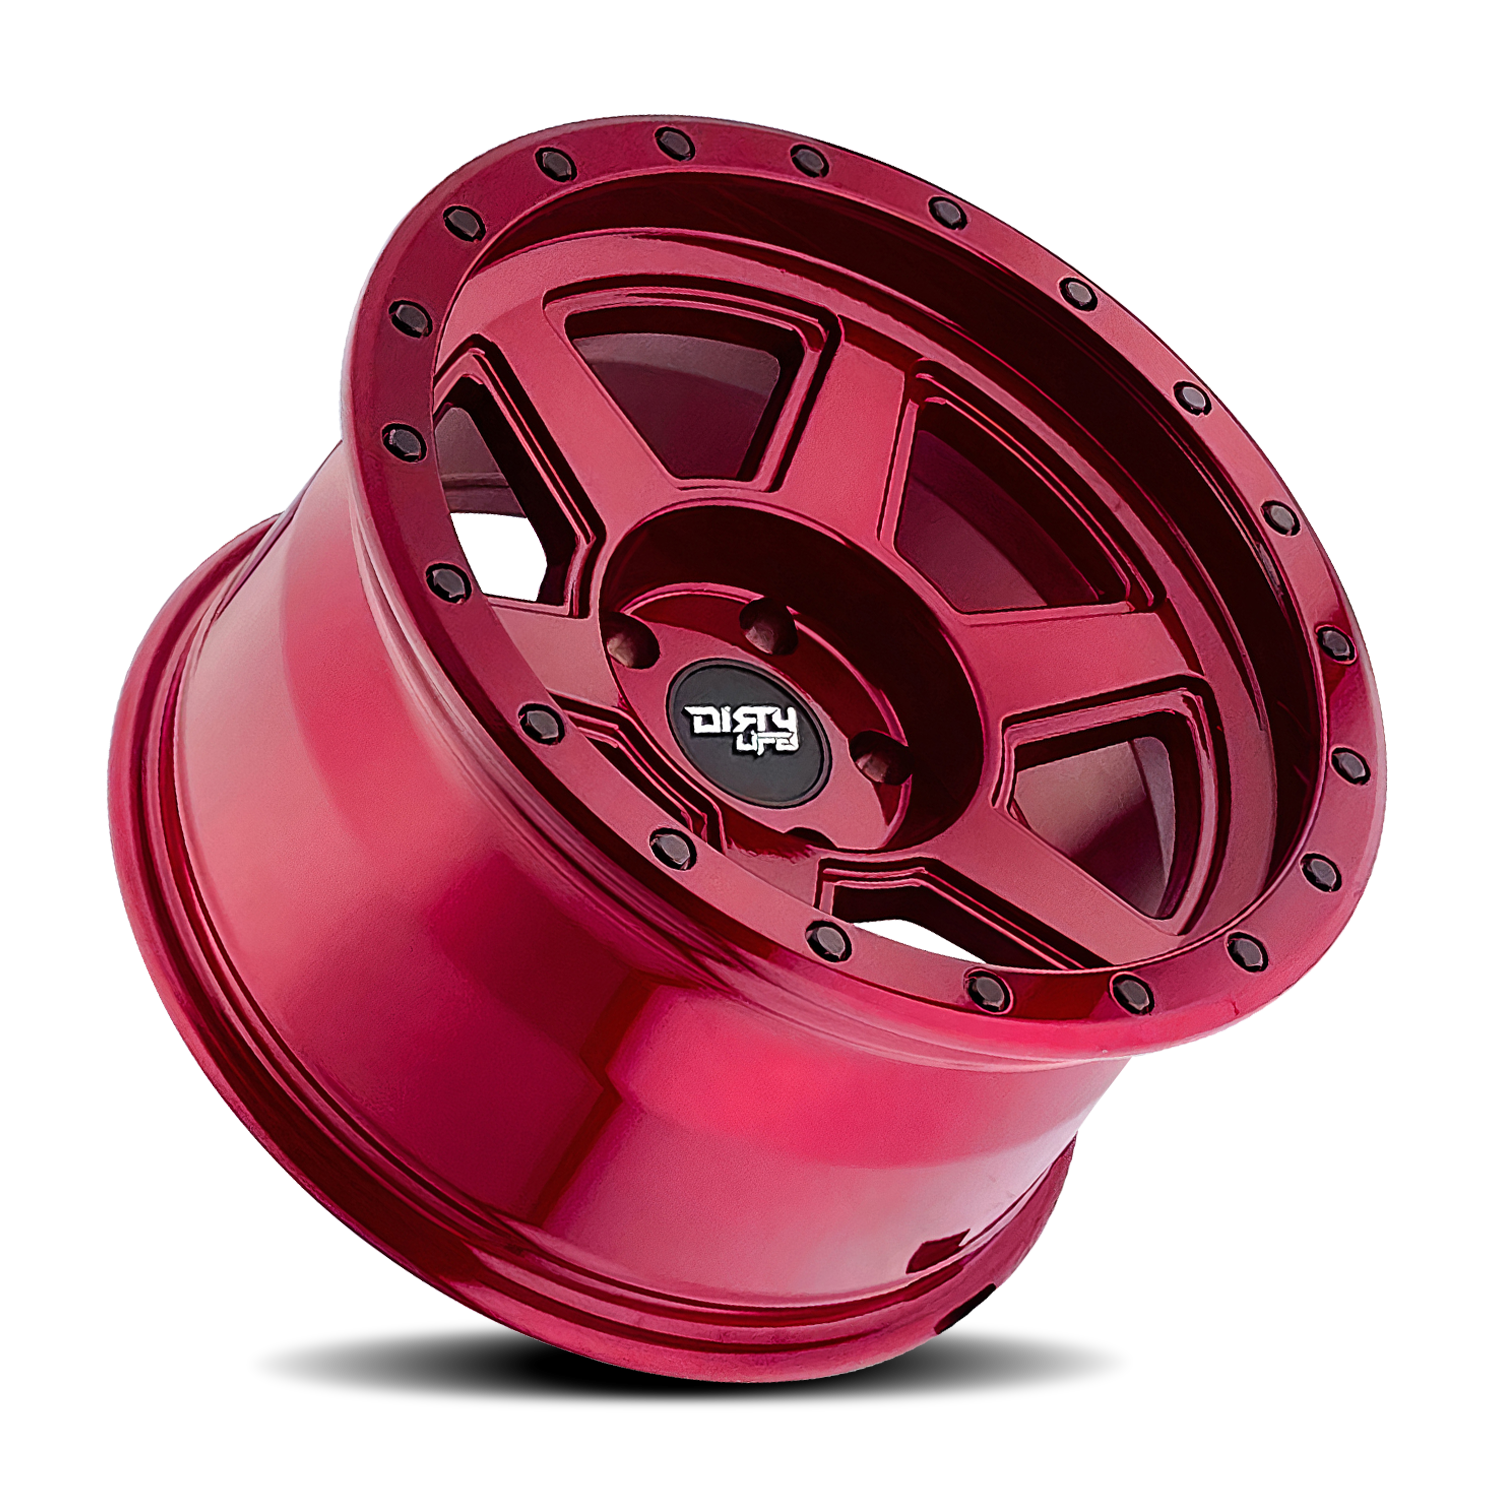 Dirty Life COMPOUND Gloss crimson candy red 17x9 -38 5x127mm 78.1mm